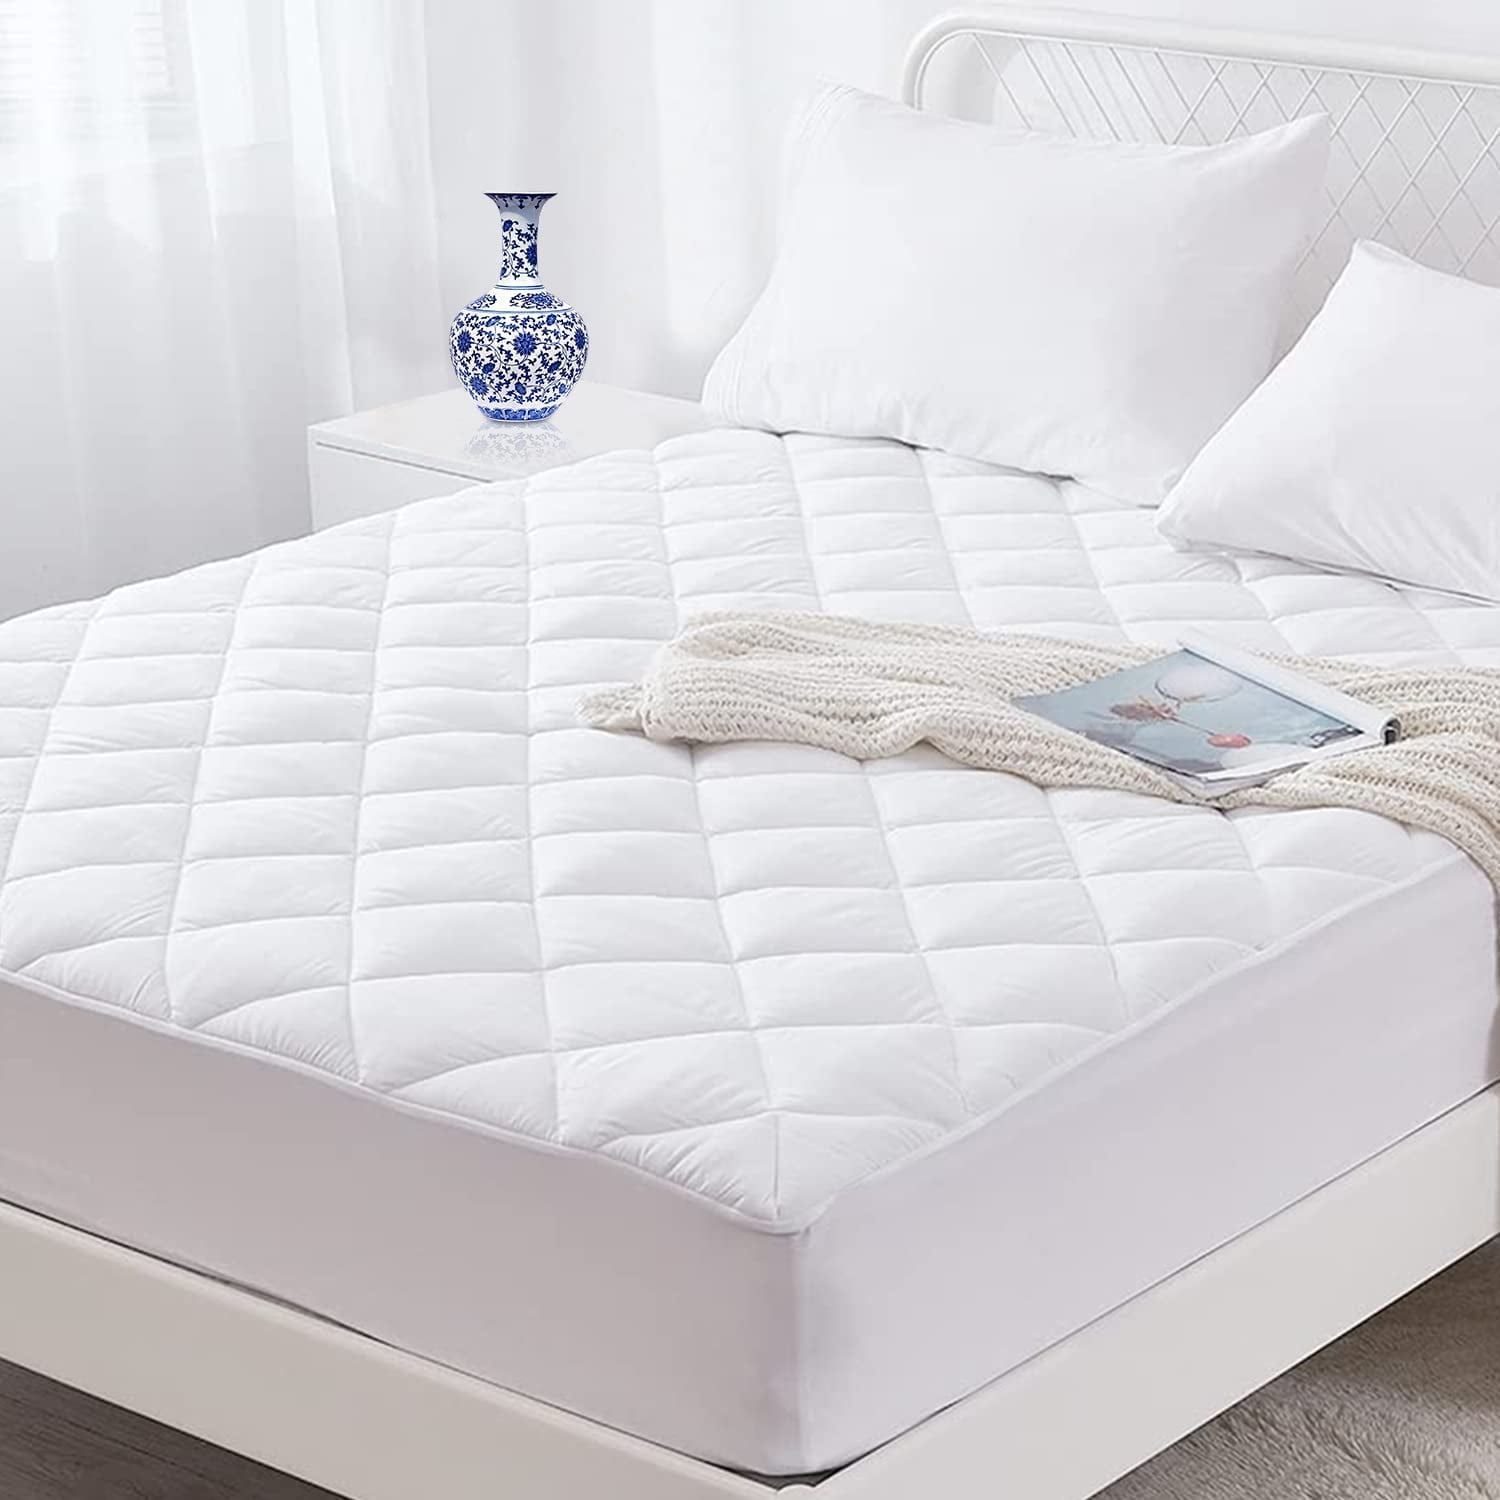 16 inch Extra Deep Quilted Mattress Protector Bed Sheet Cover Hypo Allergenic 